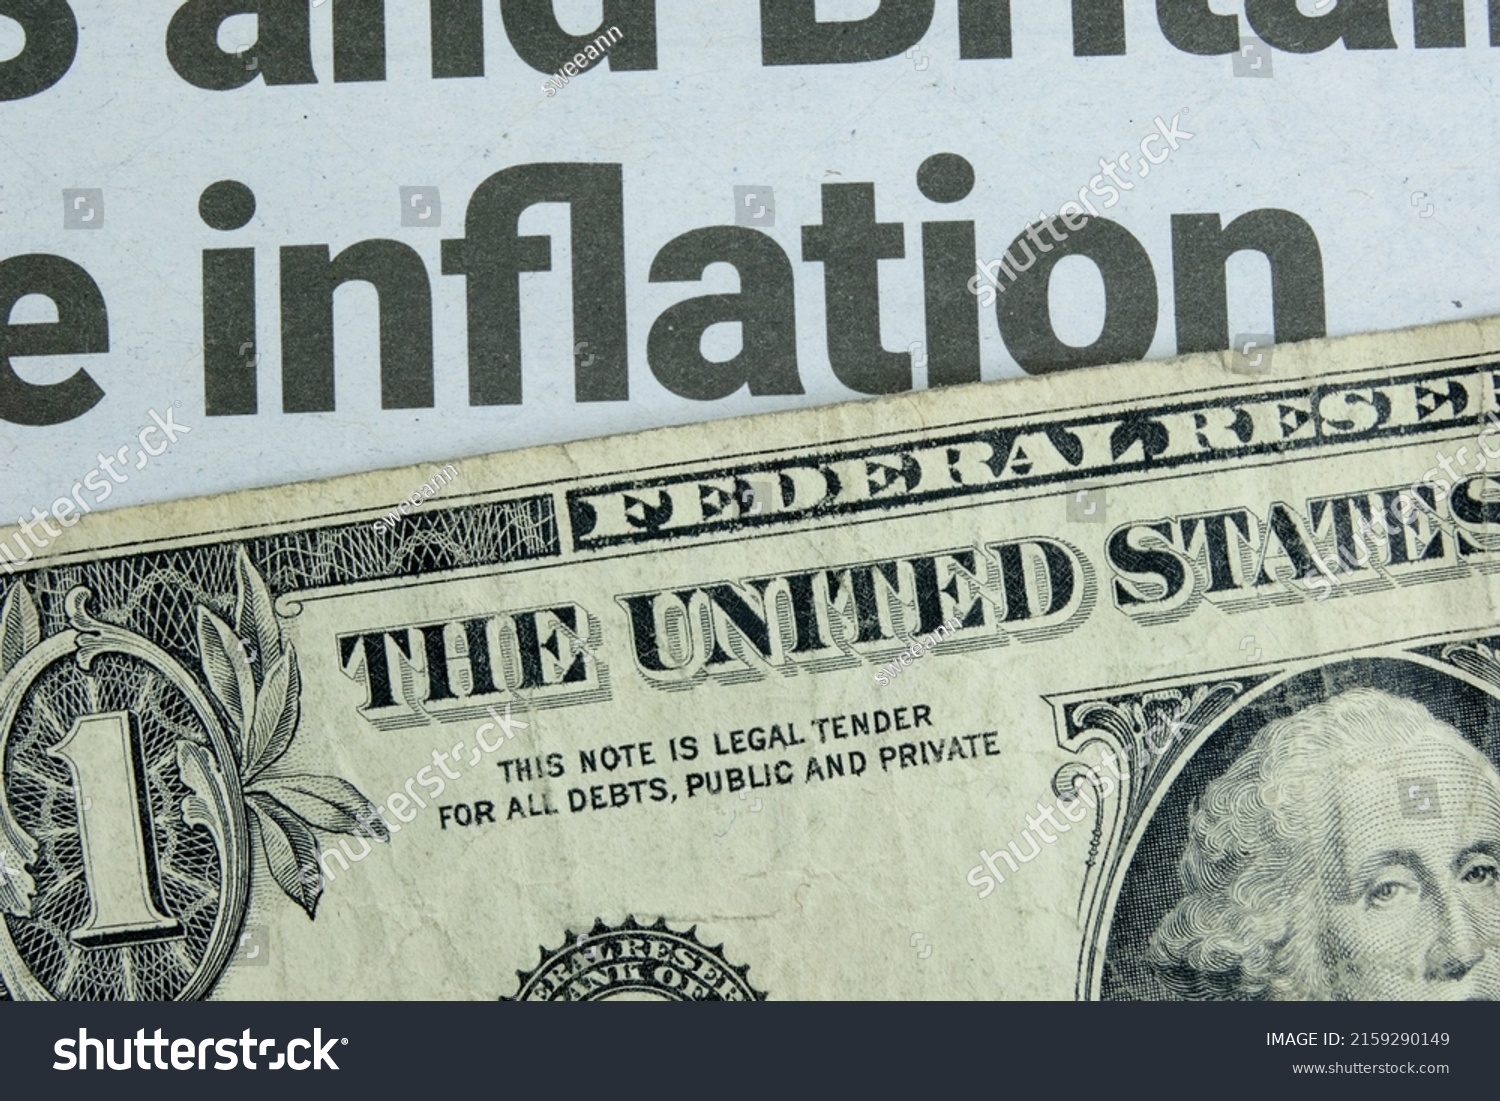 A US one dollar bill lying below a newspaper headline news on inflation. Concept for the dollar buying power amidst rising goods prices due to shortages and increasing demand. Closeup macro view. #2159290149